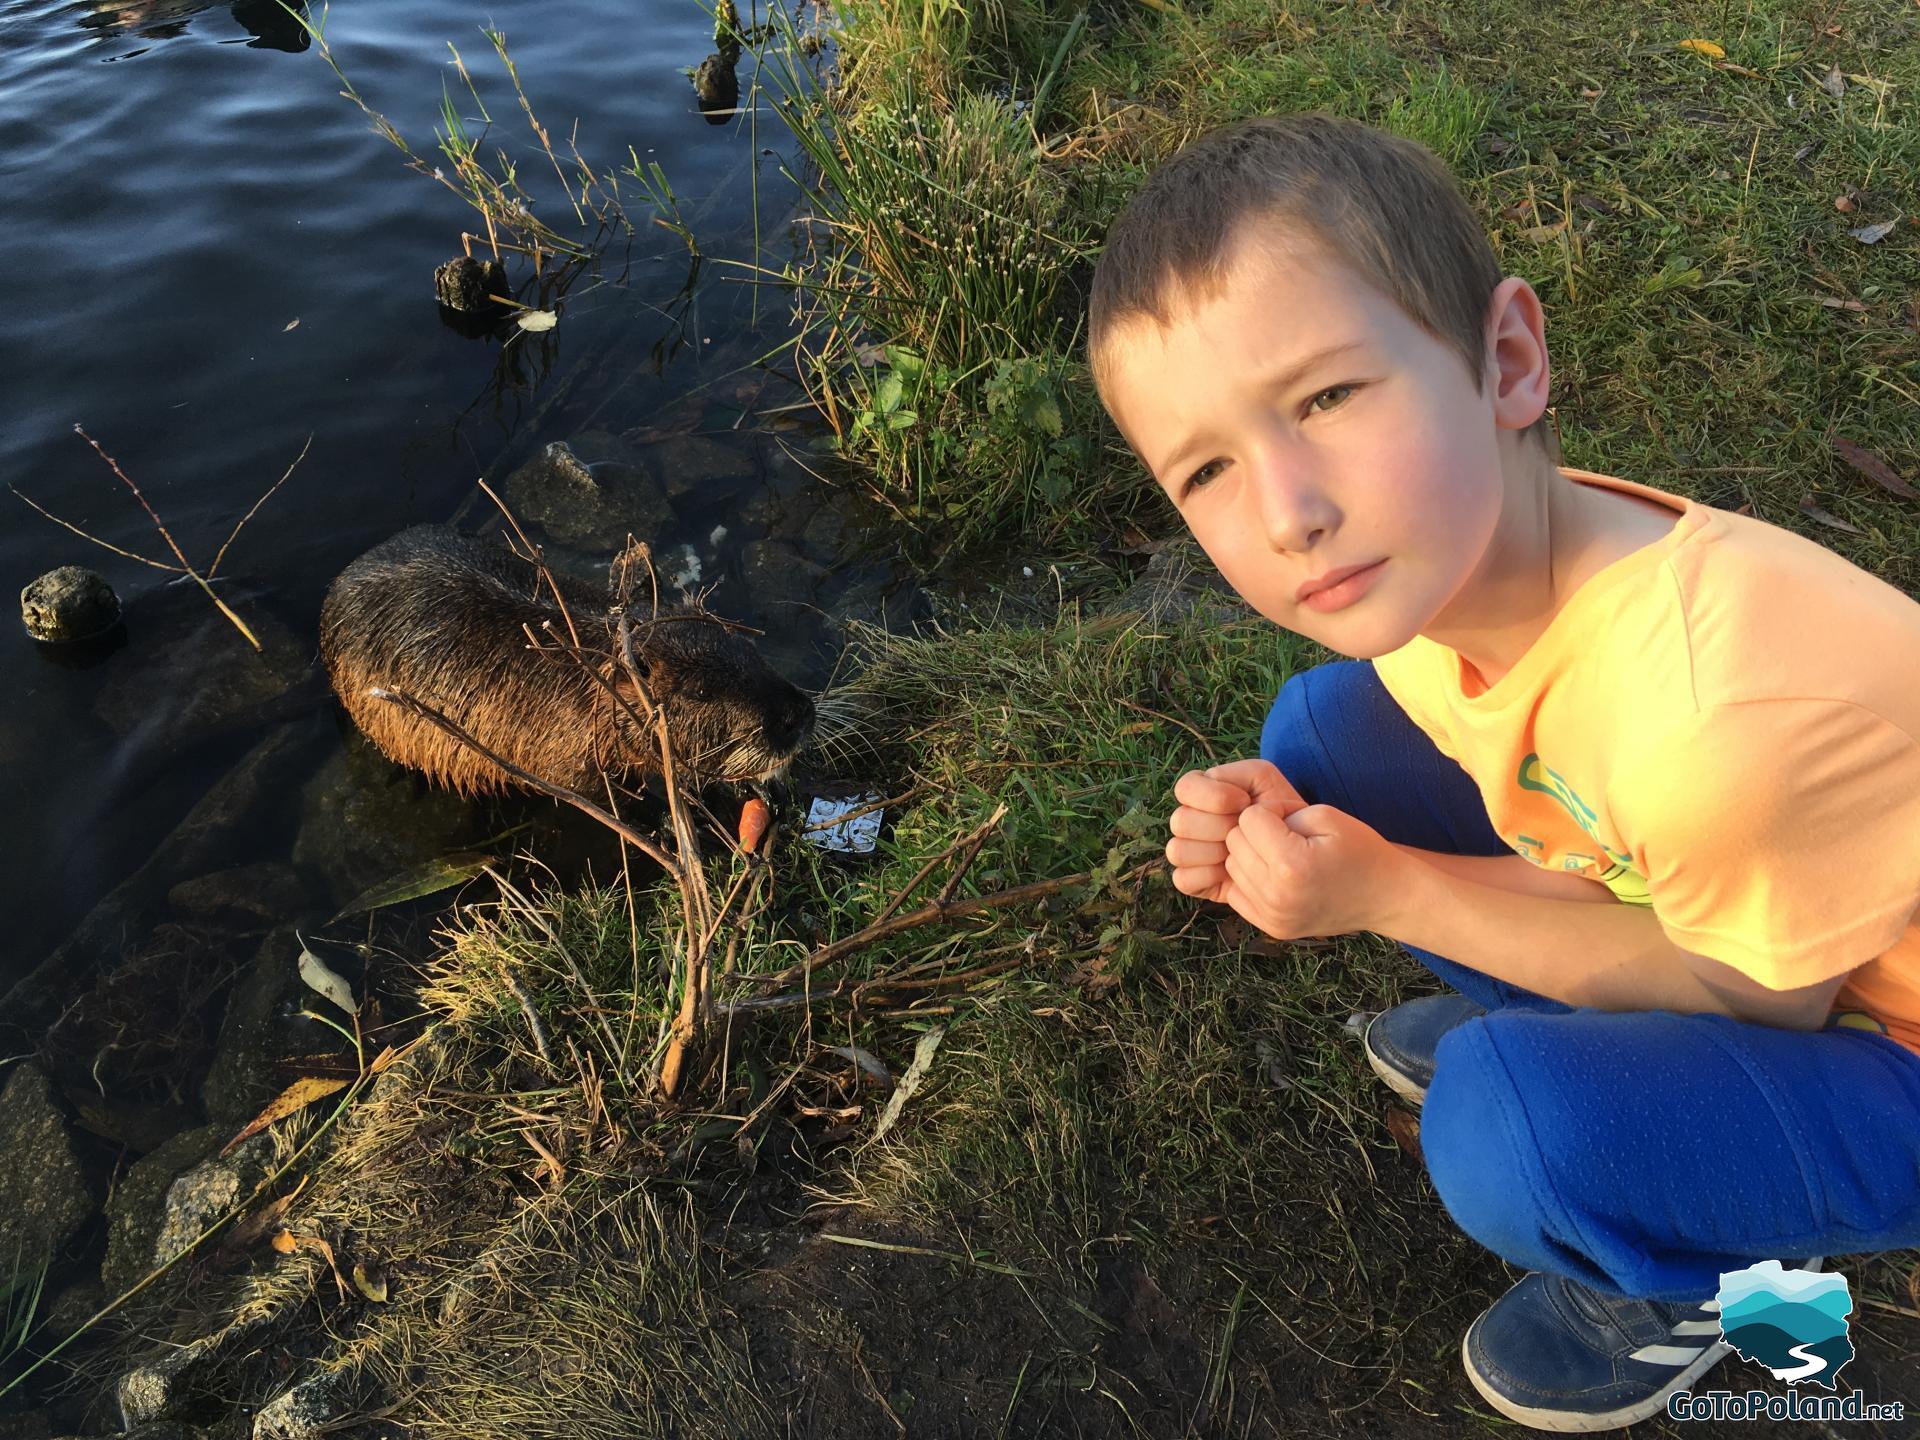 A small nutria eating a carrot on the bank of the river, small boy next to him